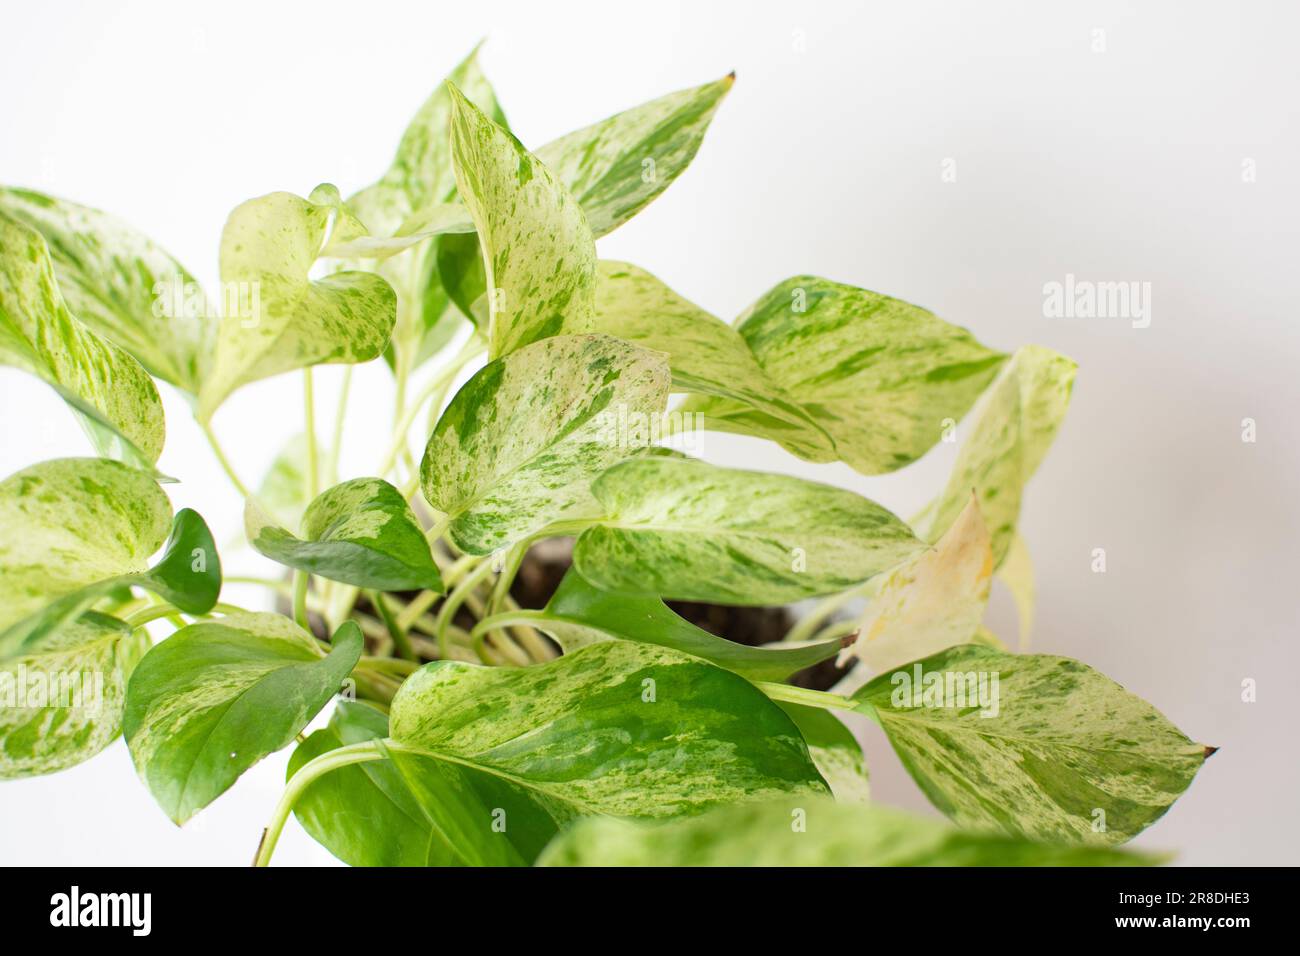 The white and green variegated leaves of Marble Queen Pothos (Snow queen pothos) Stock Photo